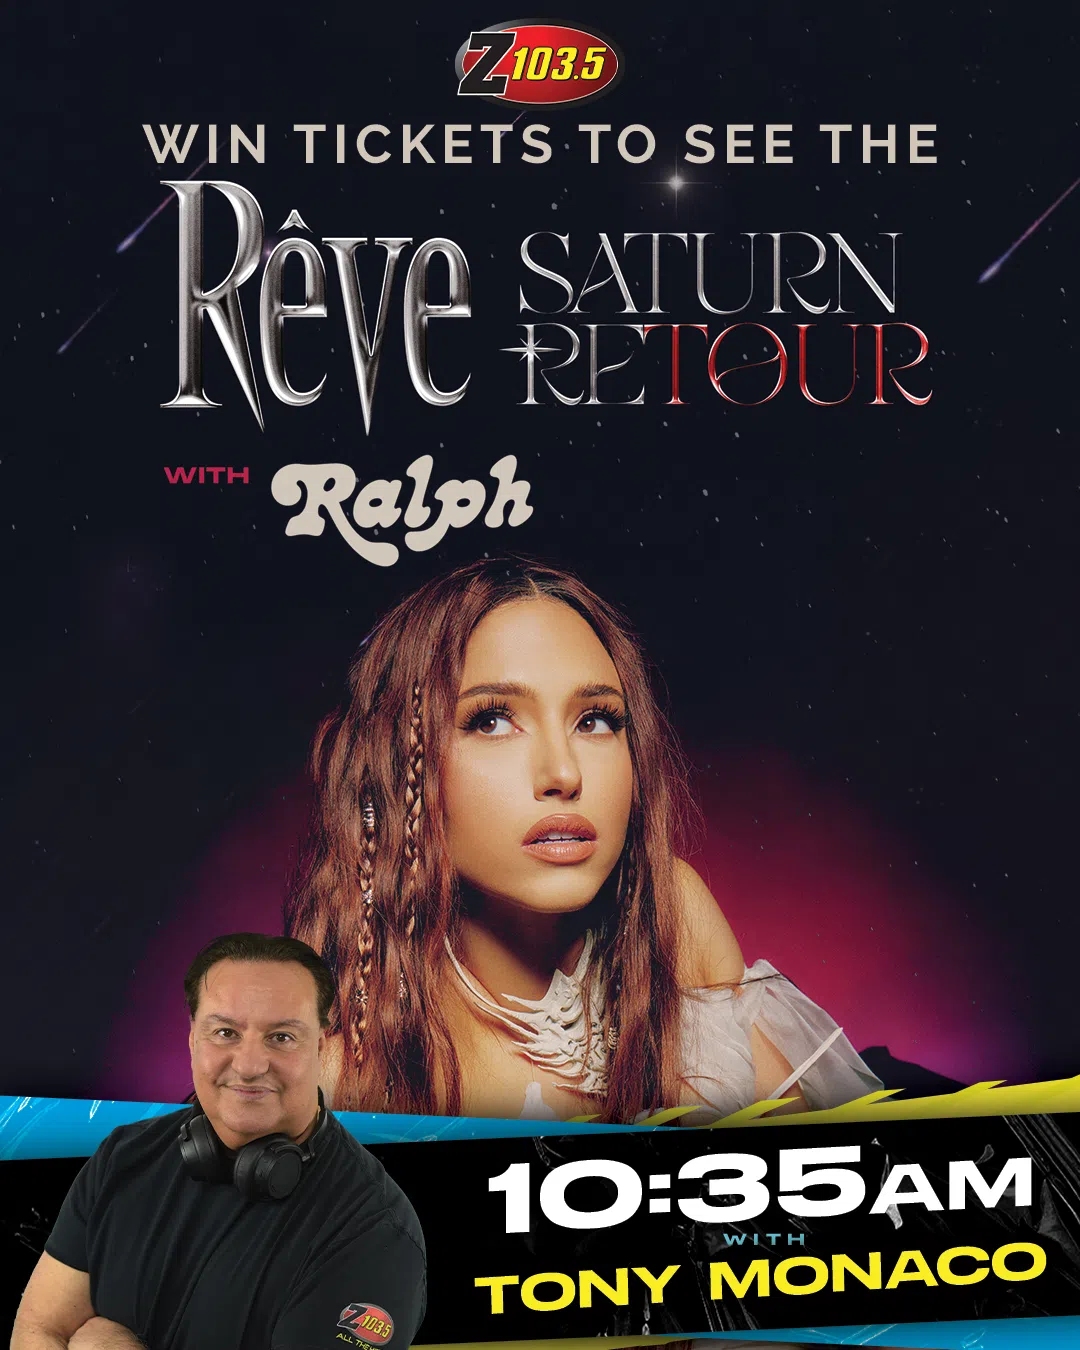 Feature: https://z1035.com/win/win-tickets-to-see-reve/